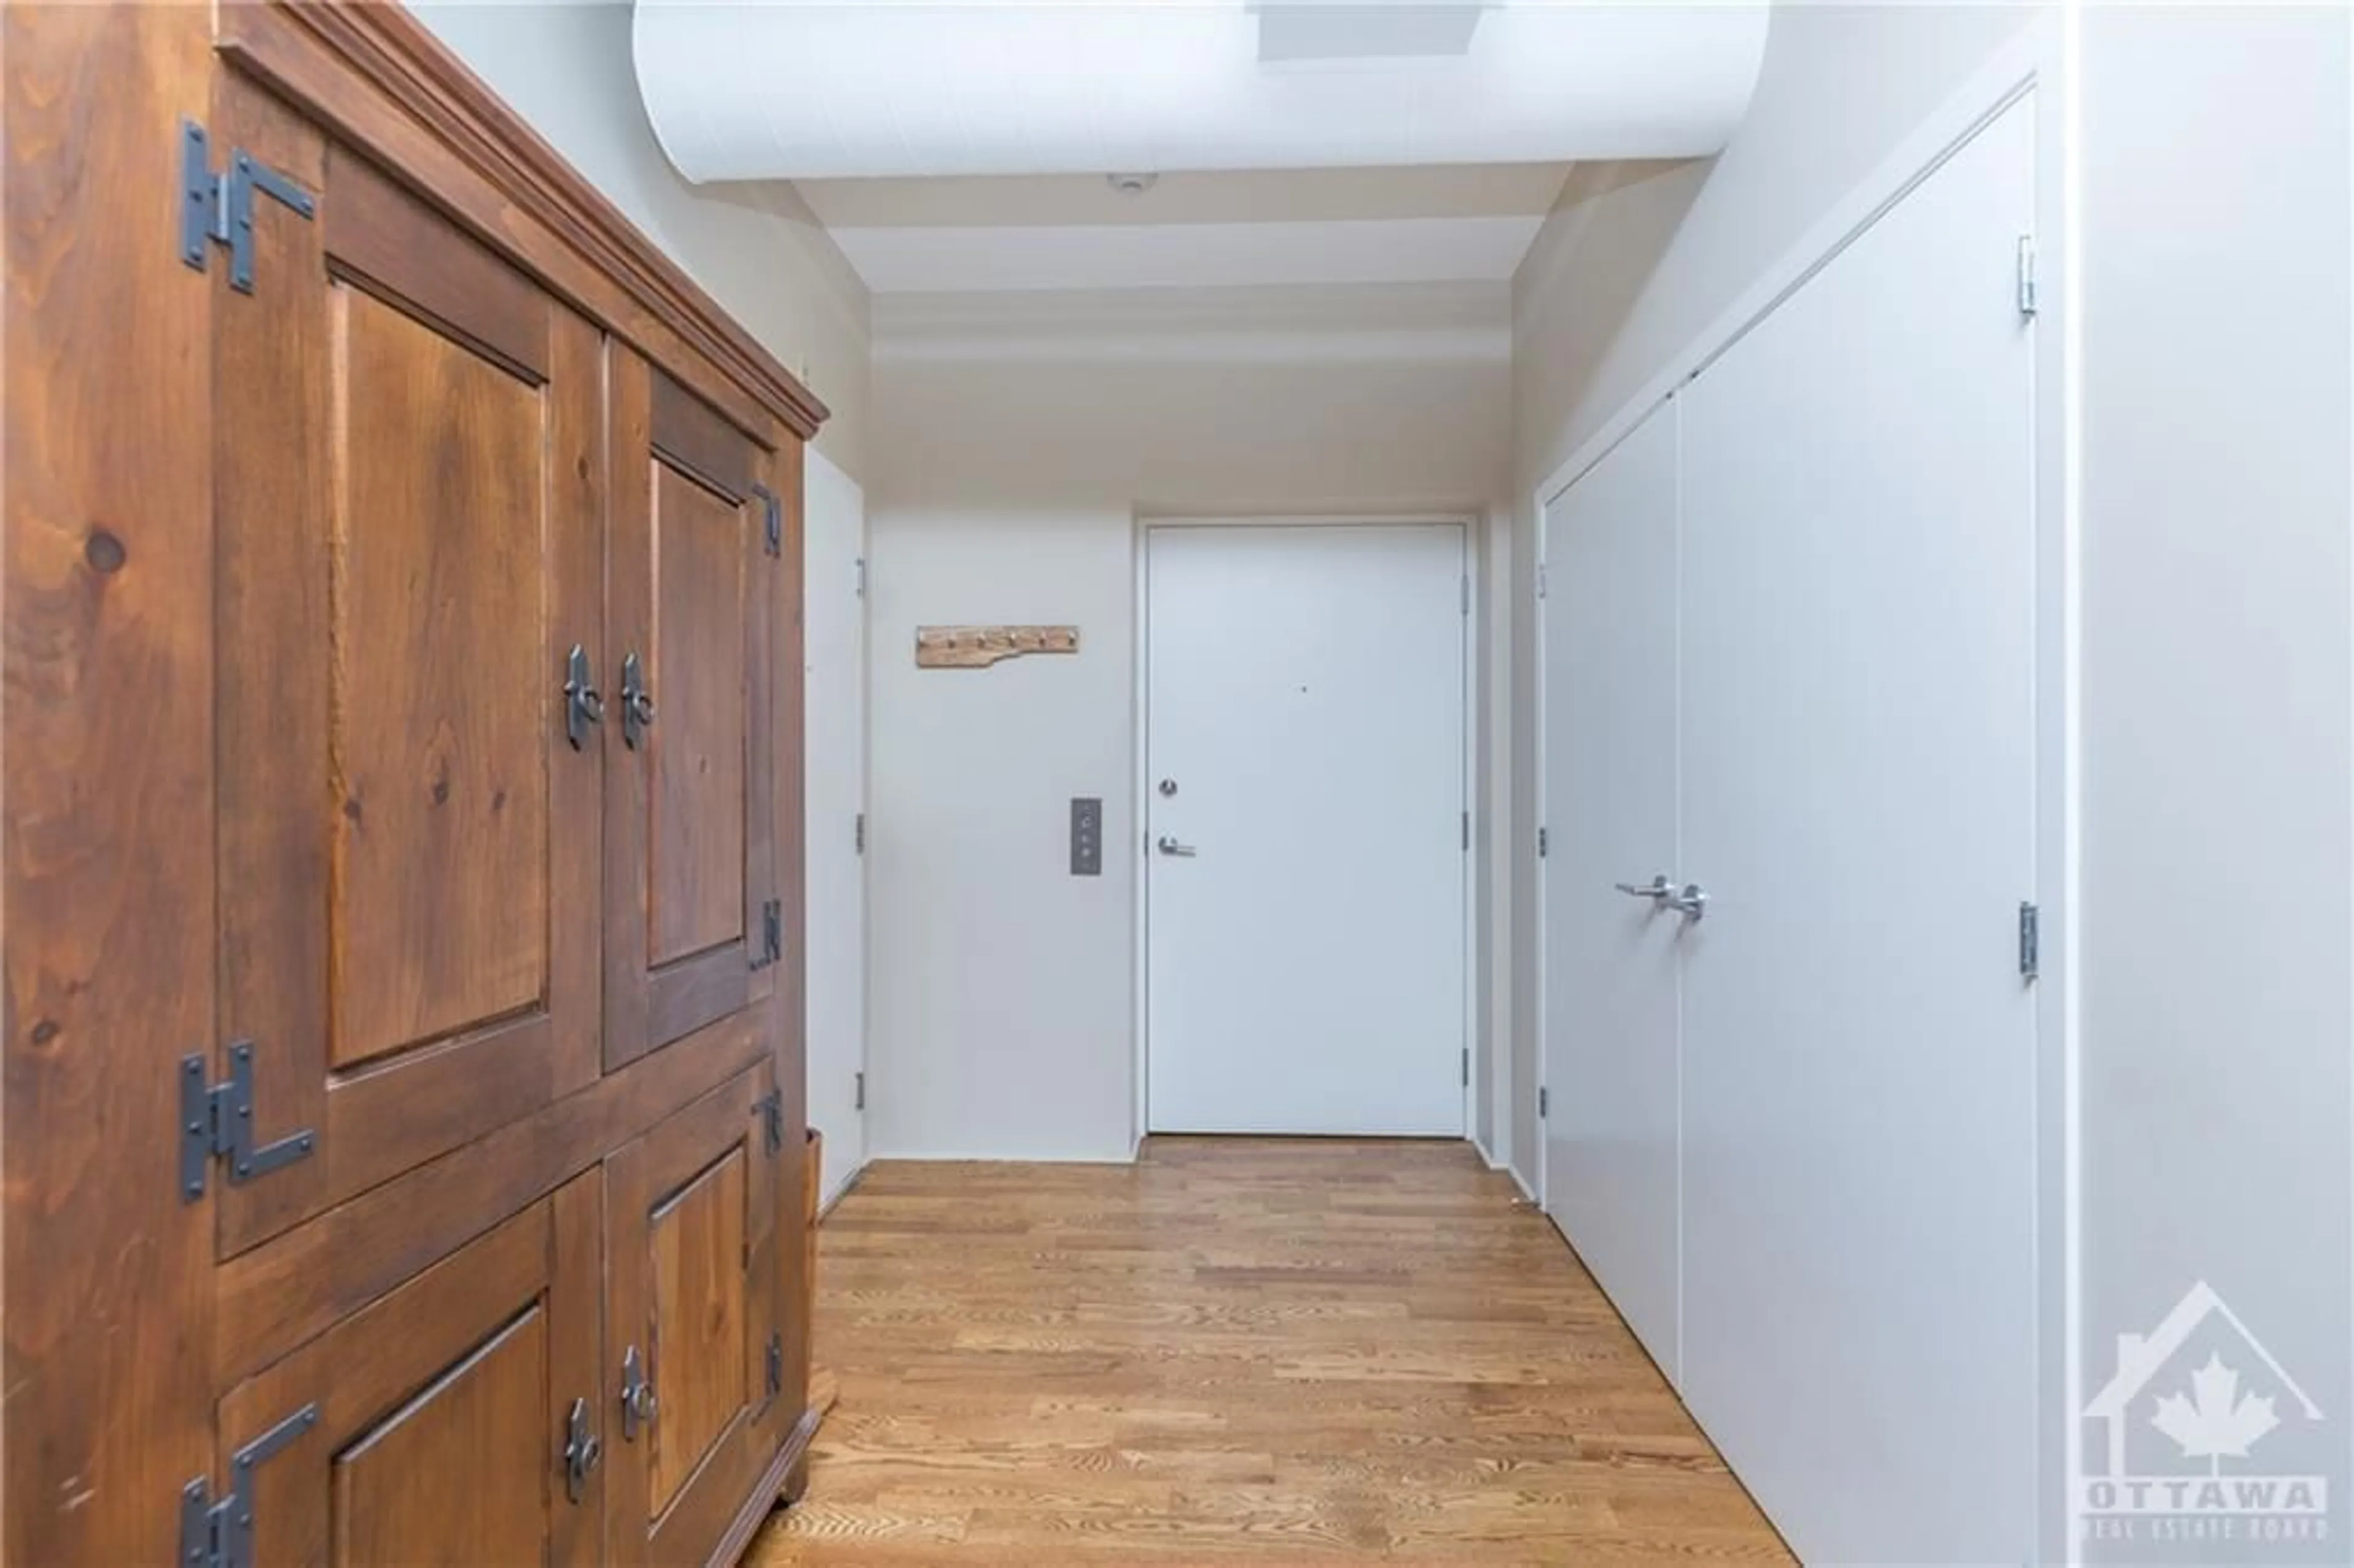 Indoor entryway for 144 CLARENCE St #3B, Ottawa Ontario K1N 5P8